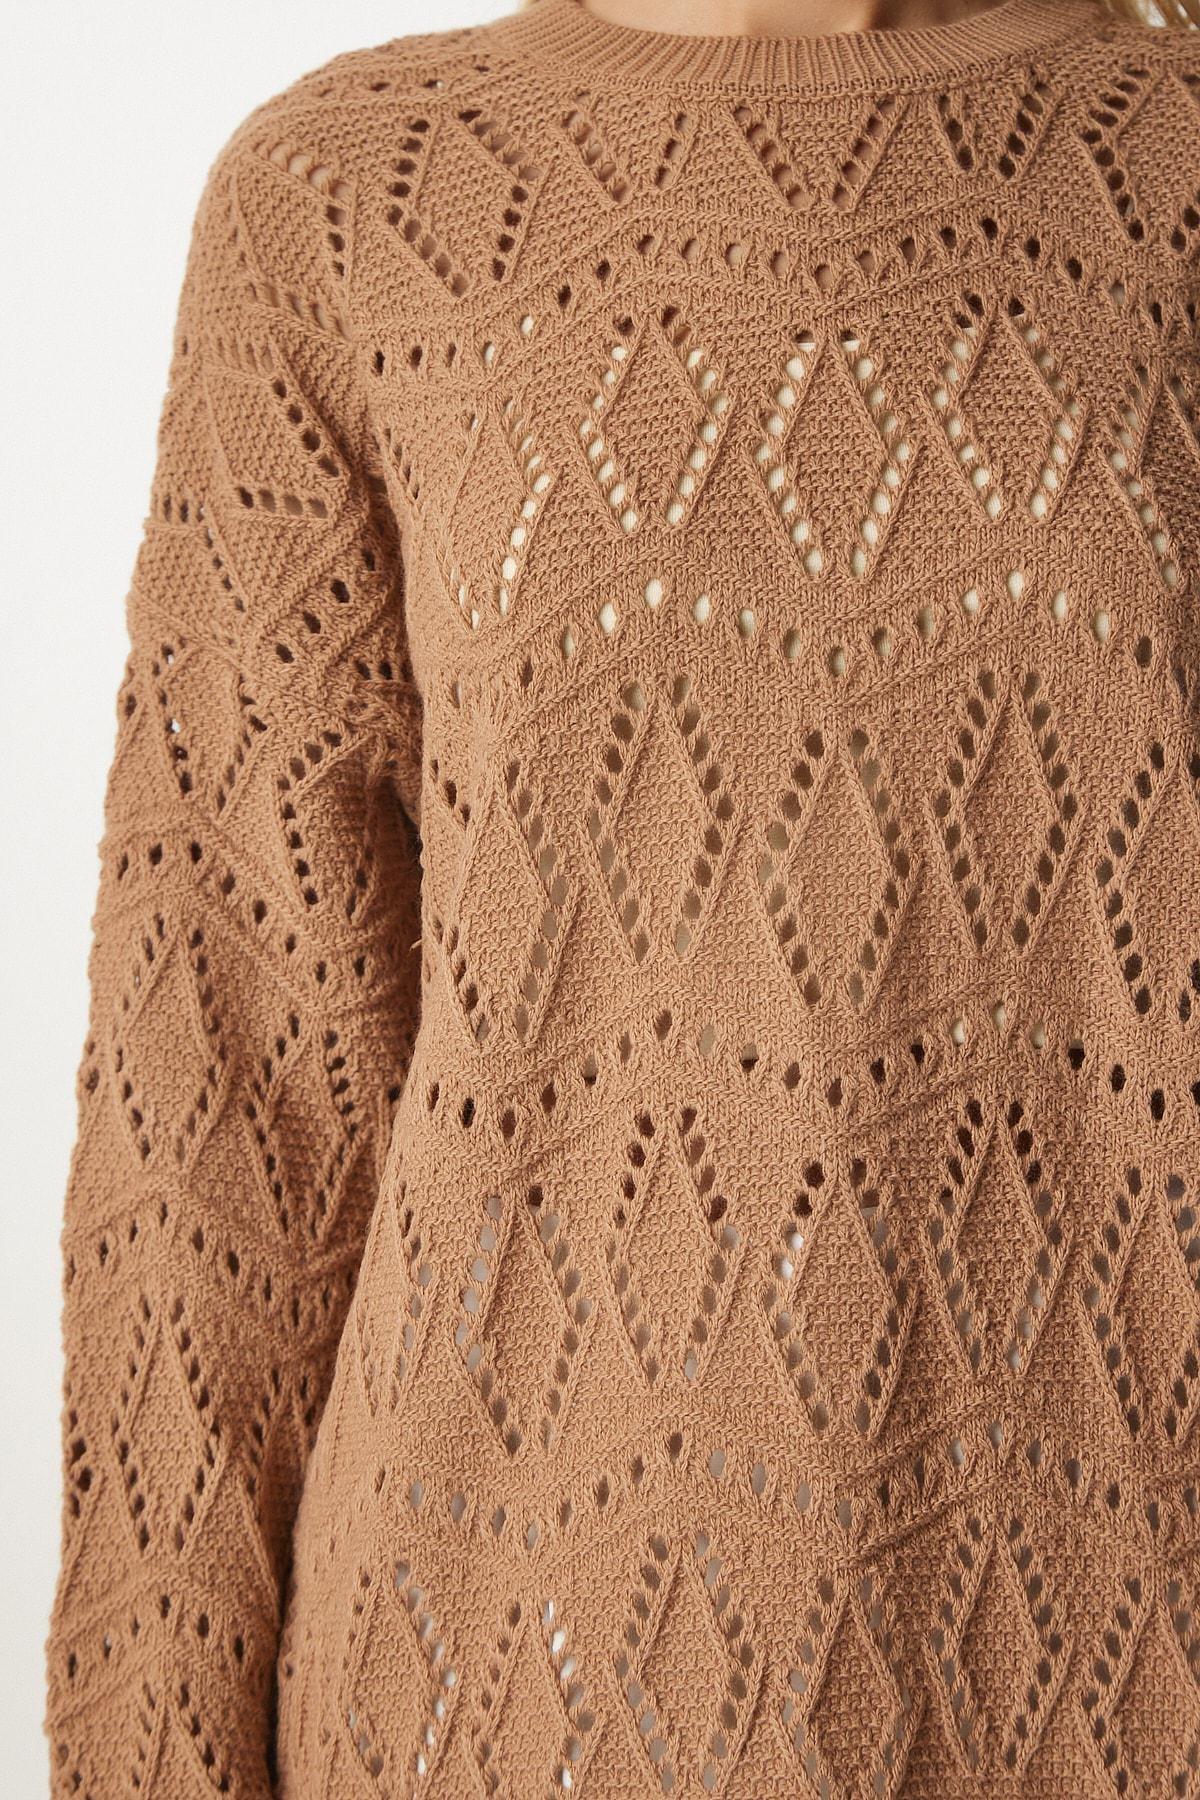 Happiness Istanbul - Brown Openwork Knitwear Sweater